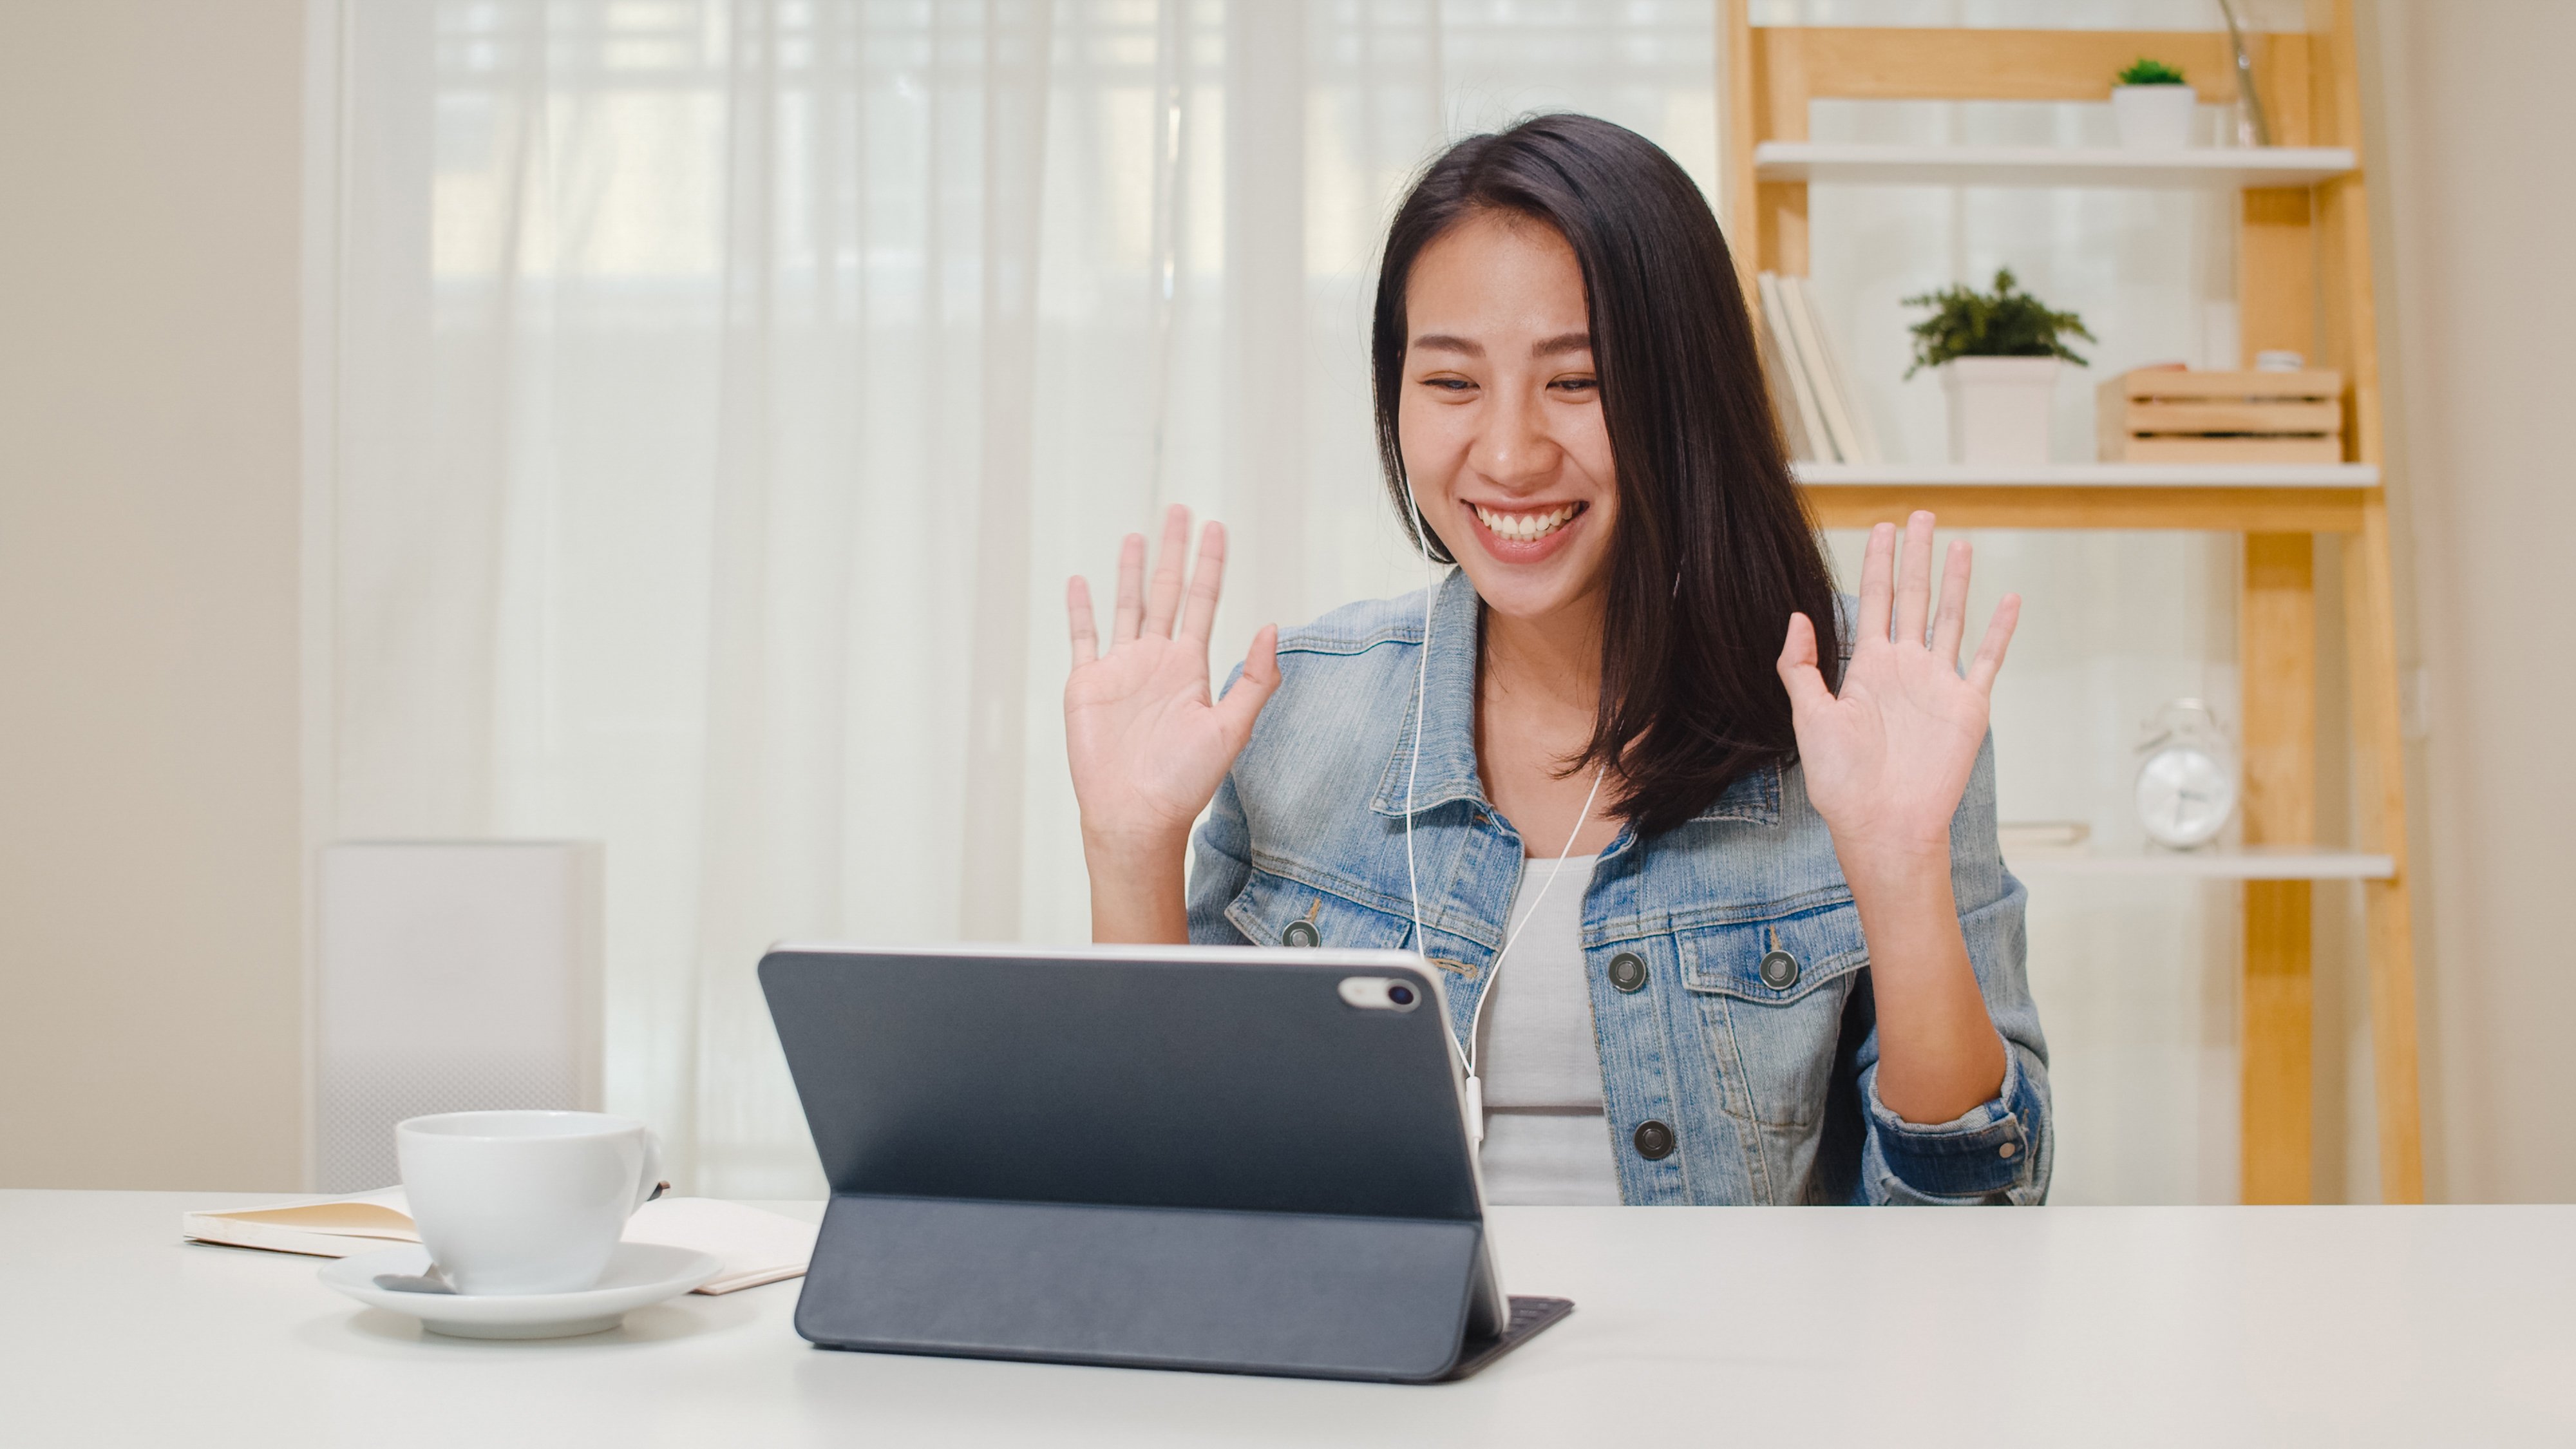 freelance-business-women-casual-wear-using-tablet-working-call-video-conference-with-customer-workplace-living-room-home-happy-young-asian-girl-relax-sitting-desk-job-internet